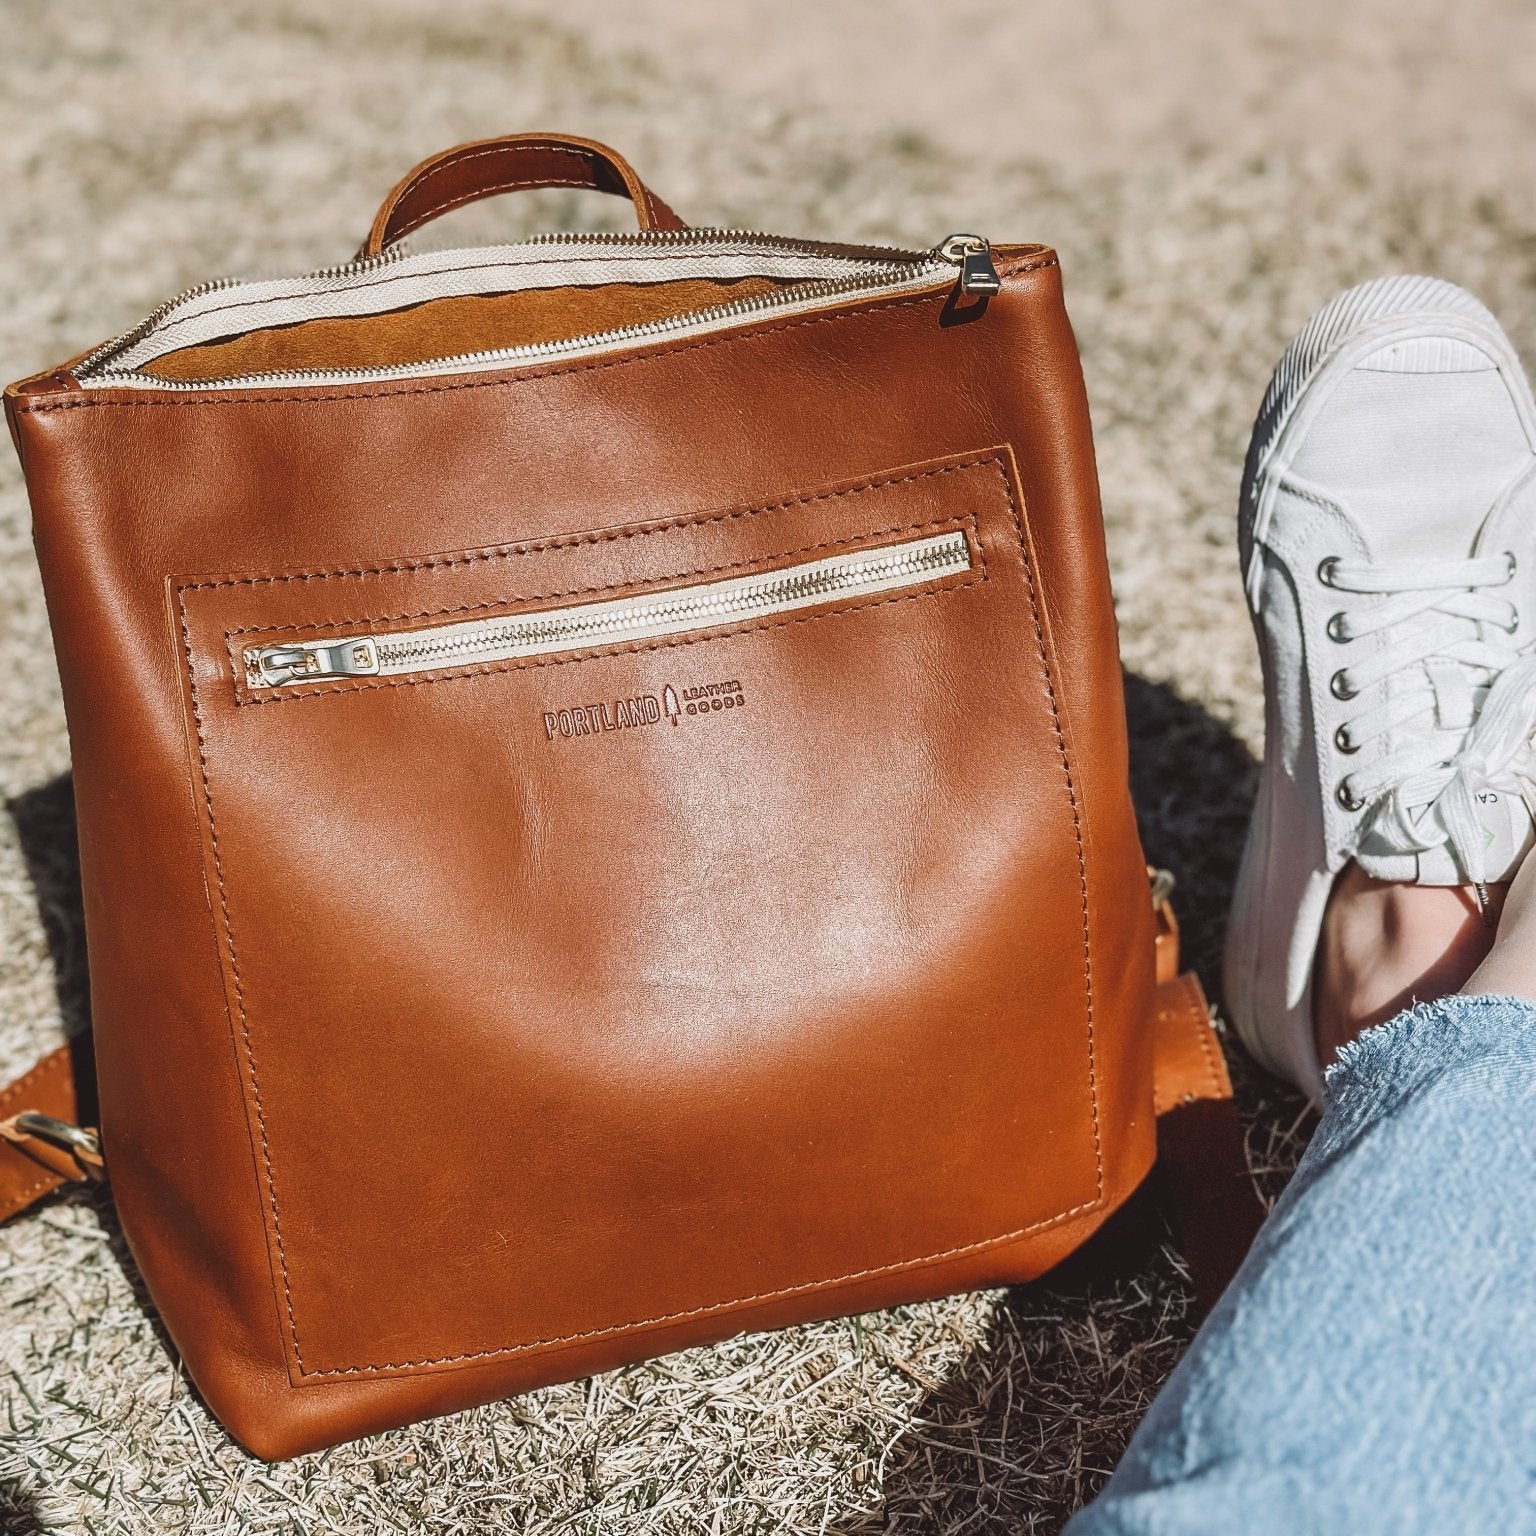 Sheena's Picks for the Best Portland Leather Bags - Sheena Marshall